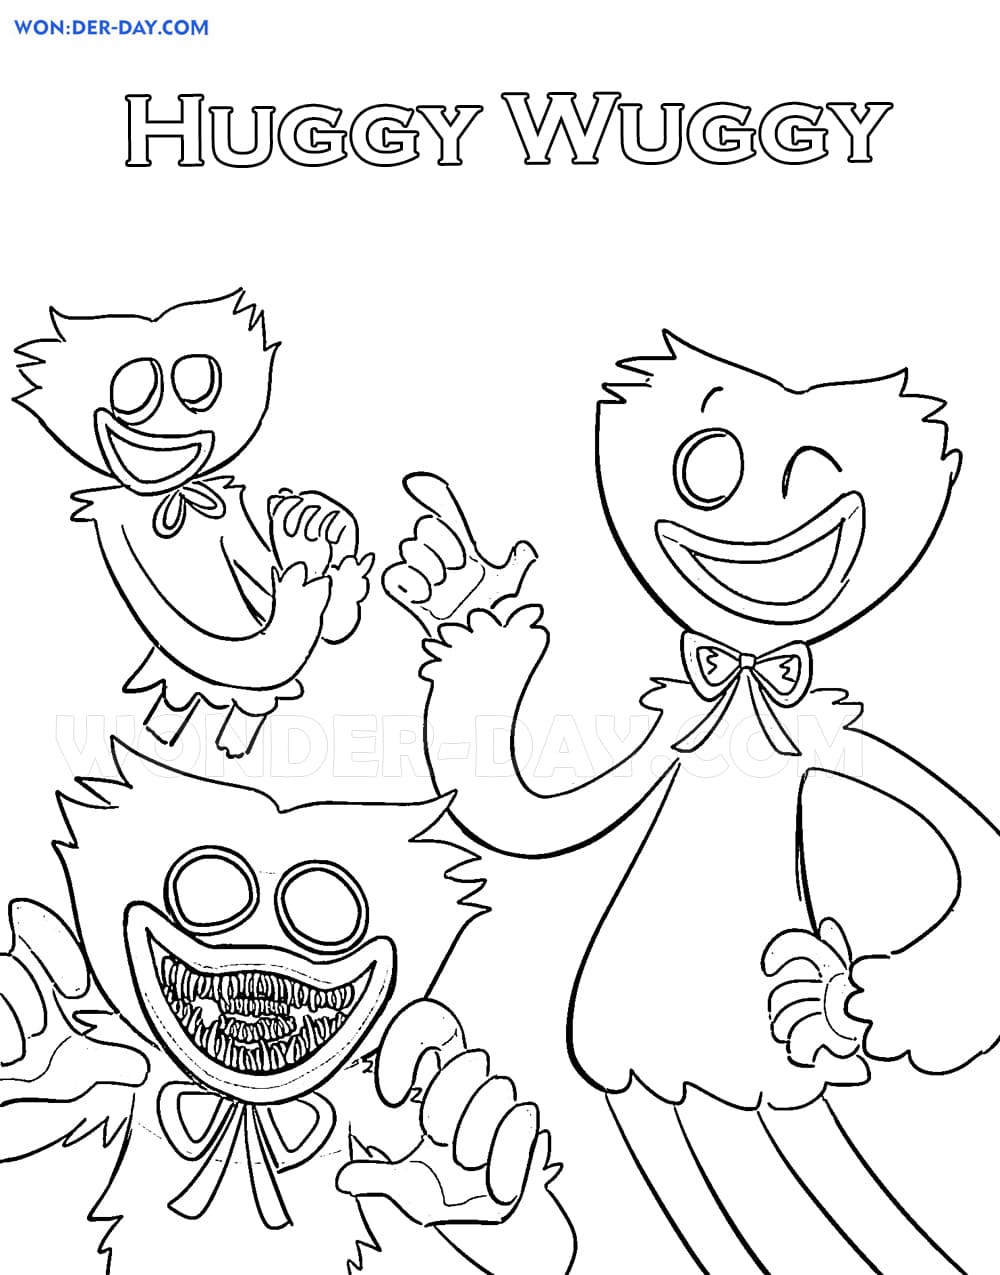 Poppy Playtime Coloring Pages   Free Coloring Pages   Coloring Home